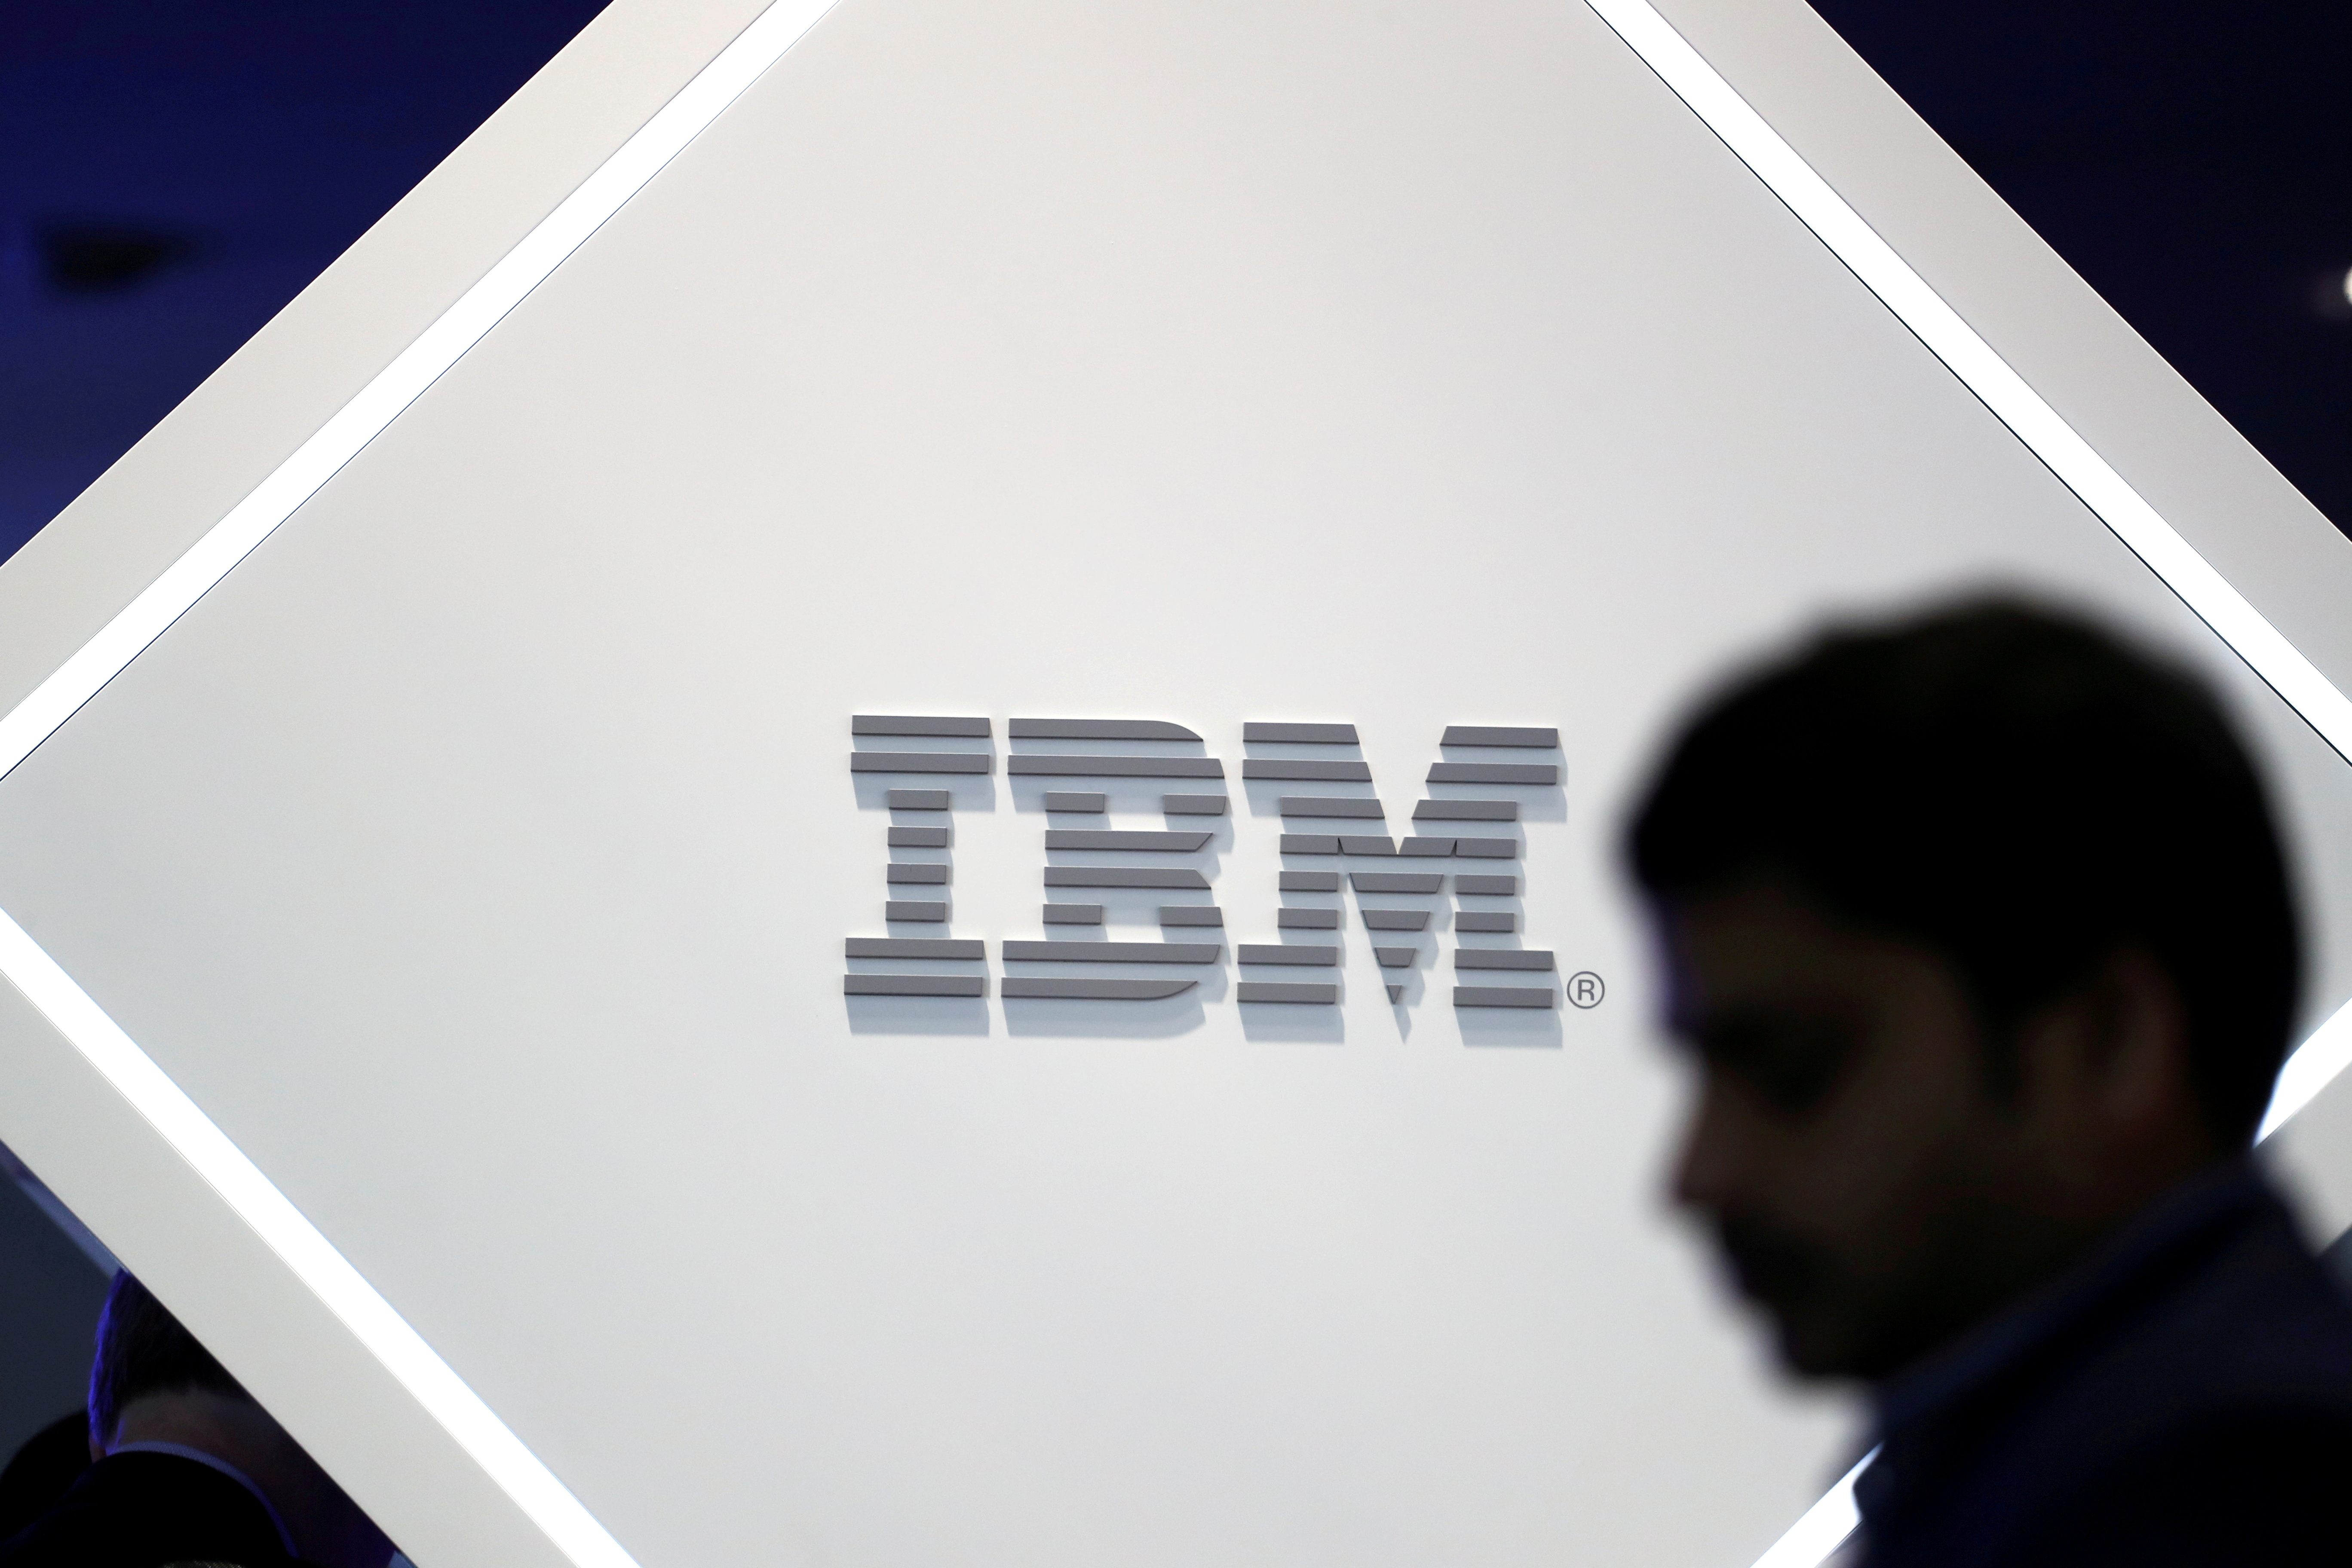 FILE PHOTO: A man stands near an IBM logo at the Mobile World Congress in Barcelona, Spain, February 25, 2019. REUTERS/Sergio Perez/File Photo